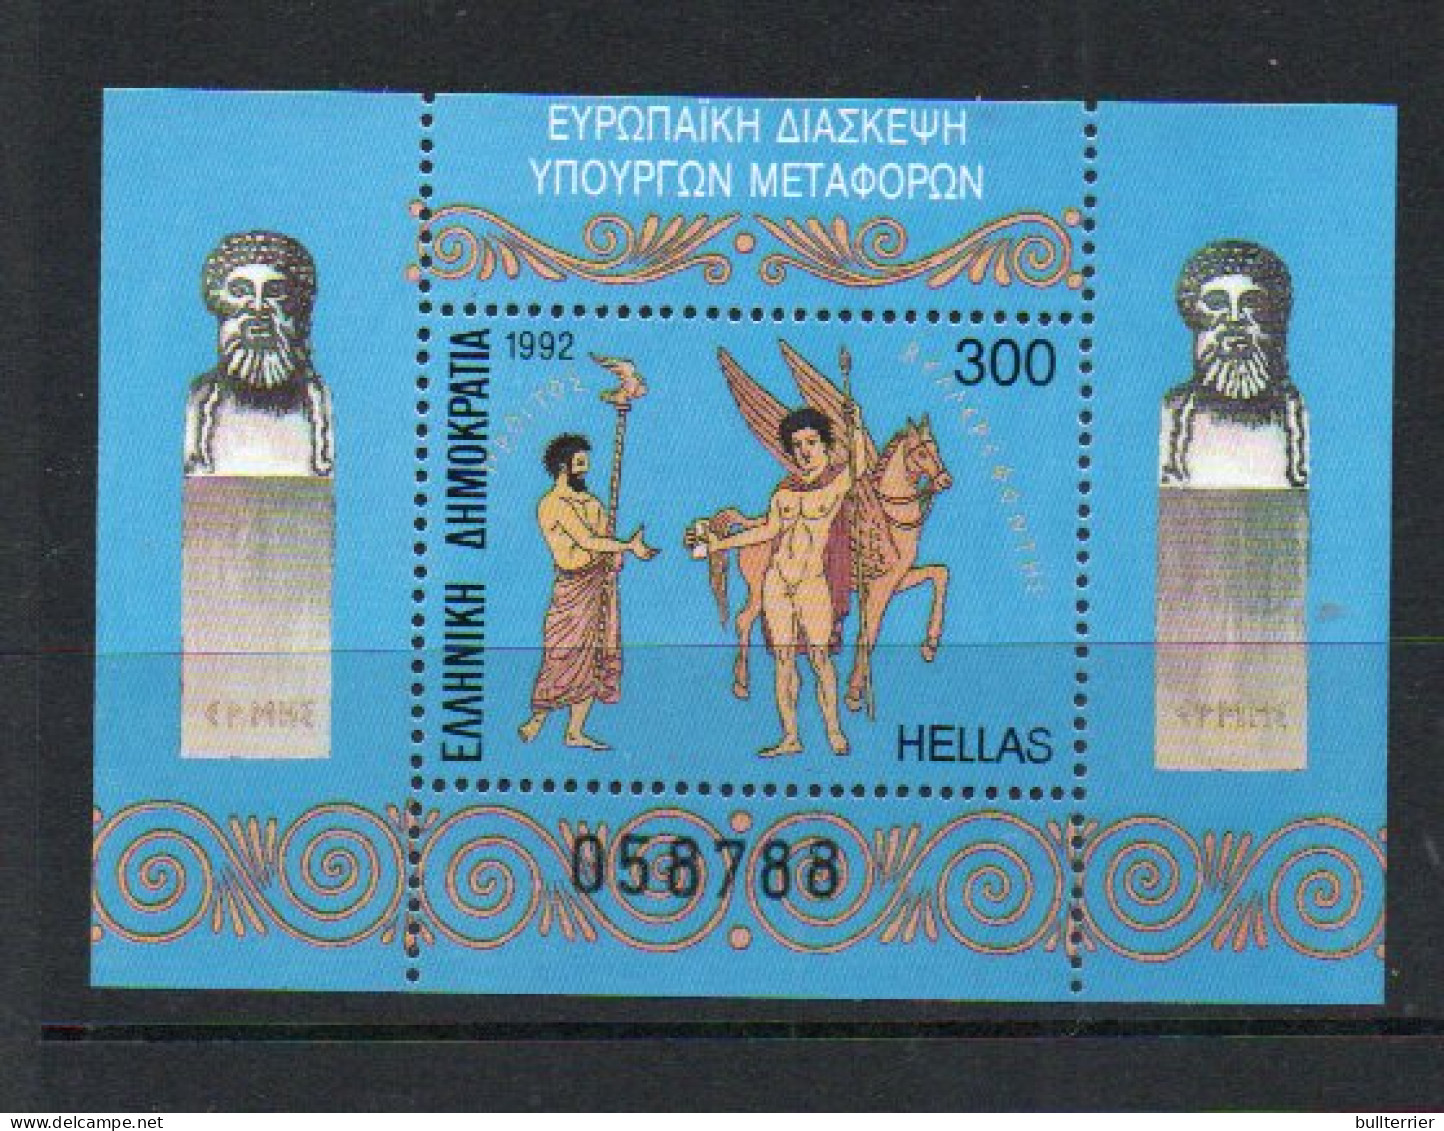 GREECE - 1992- EUROPEAN TRANSPORT MINISTERS UCONF  (sg Ms 1903)  SOUVENIR SHEET  MINT NEVER HINGED,SG £16 - Unused Stamps